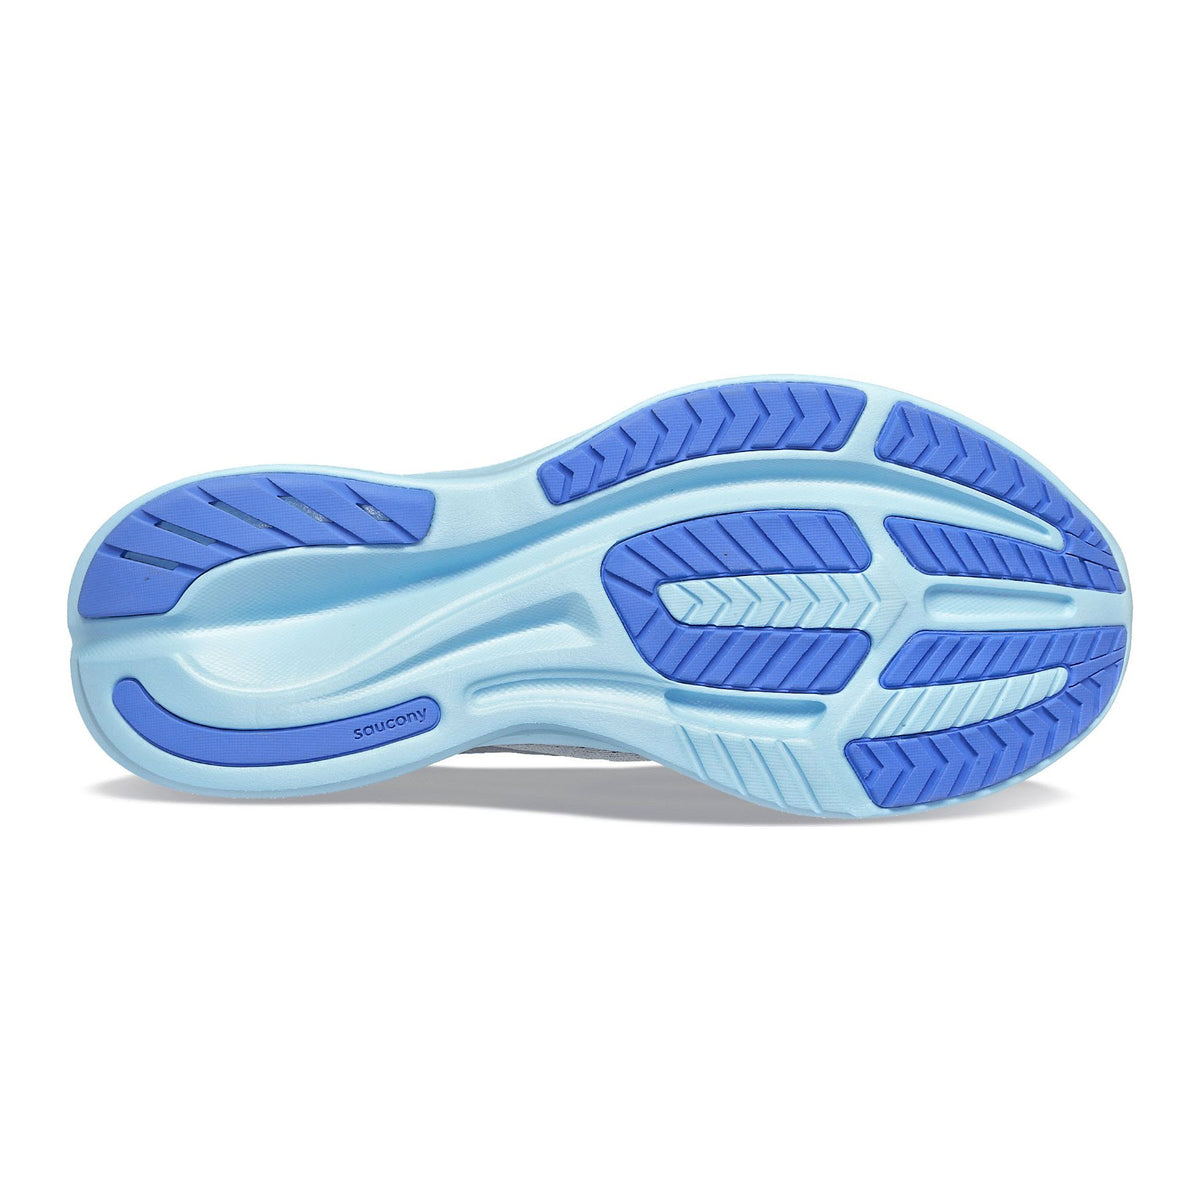 A light blue Saucony Ride 16 Fossil/Pool running shoe sole with blue and grey traction patterns, designed for neutral gaits.